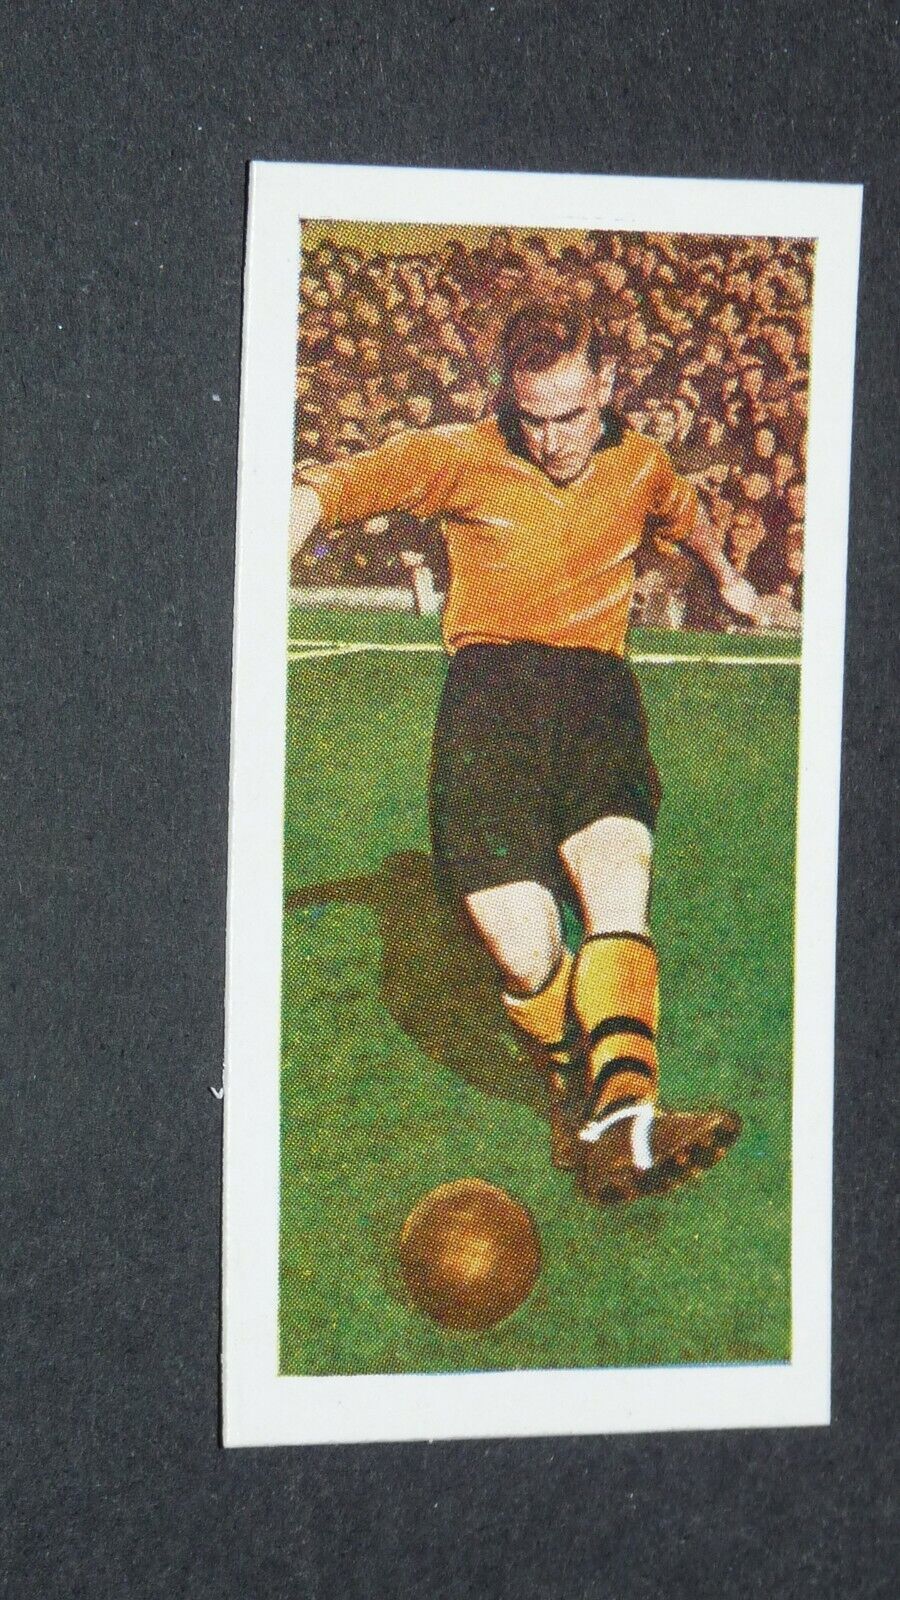 1957 FOOTBALL CADET SWEETS CARD #14 BILLY WRIGHT WOLVERHAMPTON WOLVES ENGLAND